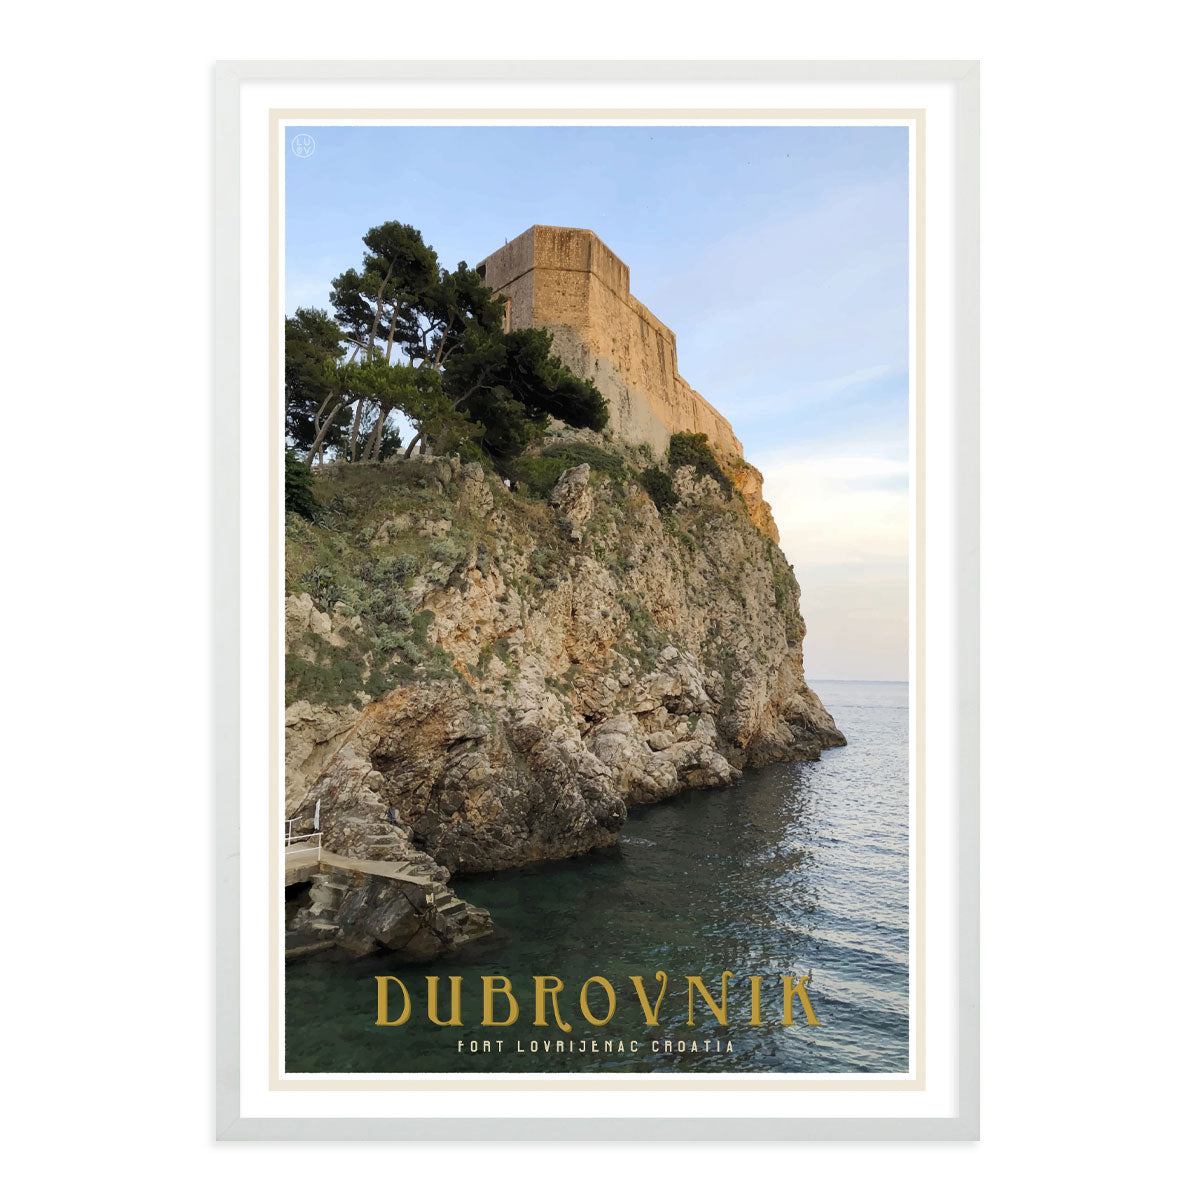 Dubrovnik vintage travel style white framed poster by places we luv